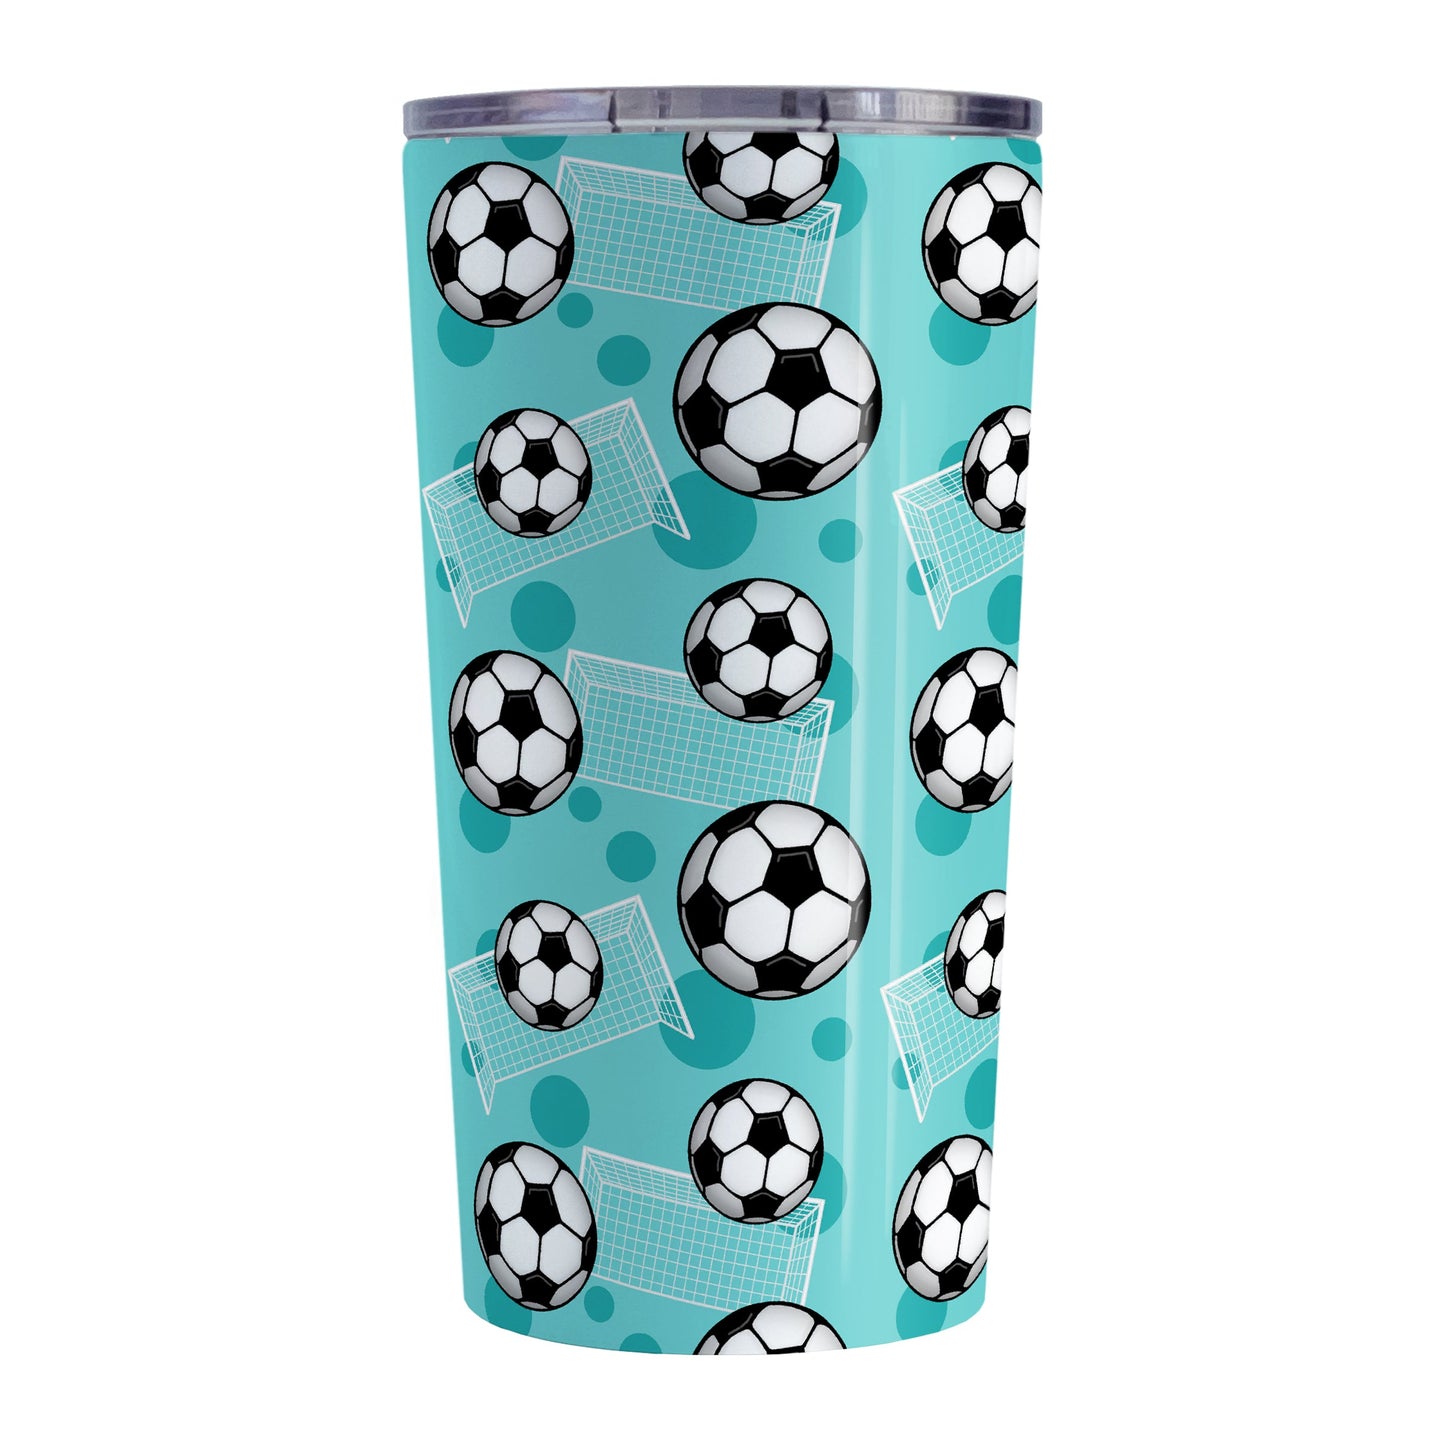 Soccer Ball and Goal Pattern Teal Tumbler Cup (20oz) at Amy's Coffee Mugs. A stainless steel insulated tumbler cup designed with a pattern of soccer balls and goals over a teal background that wraps around the cup. This teal soccer tumbler cup is perfect for people who love or play soccer.